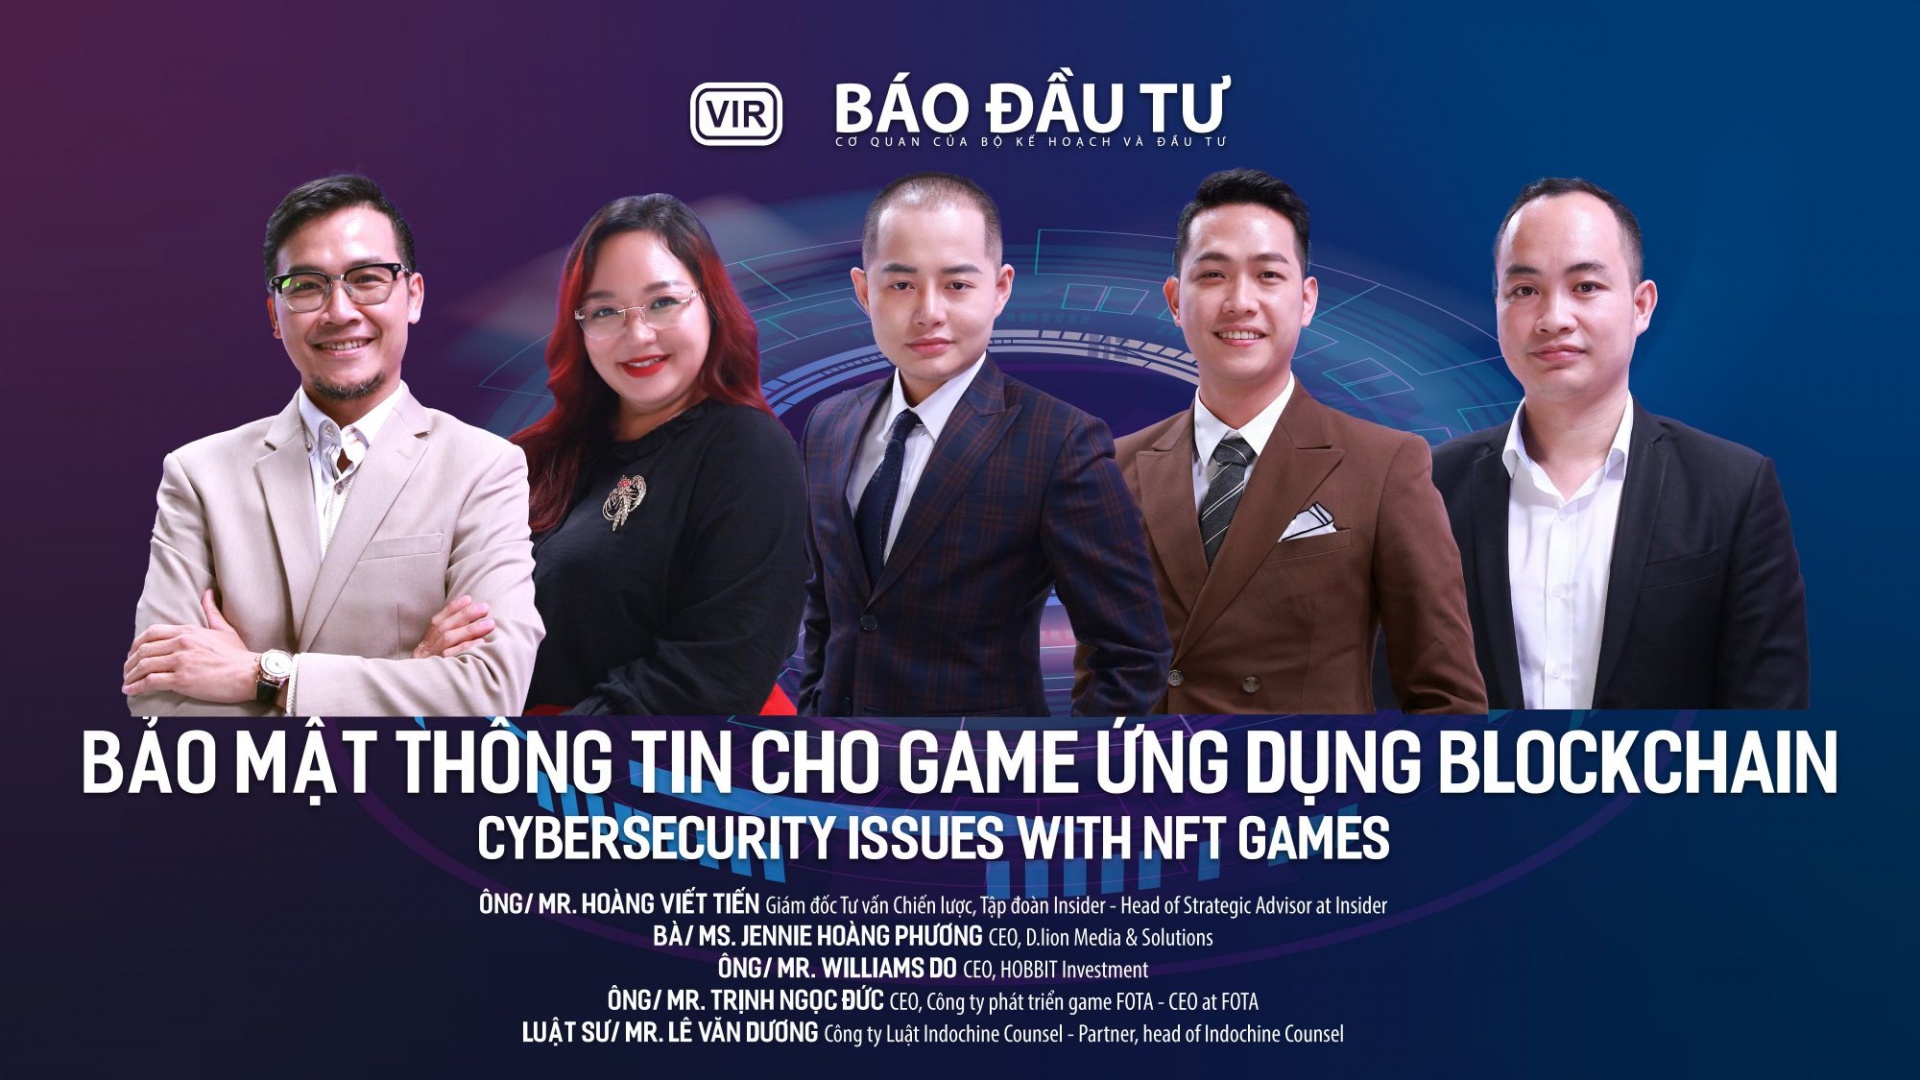 VIR talk show discusses cybersecurity issues surrounding NFT Games